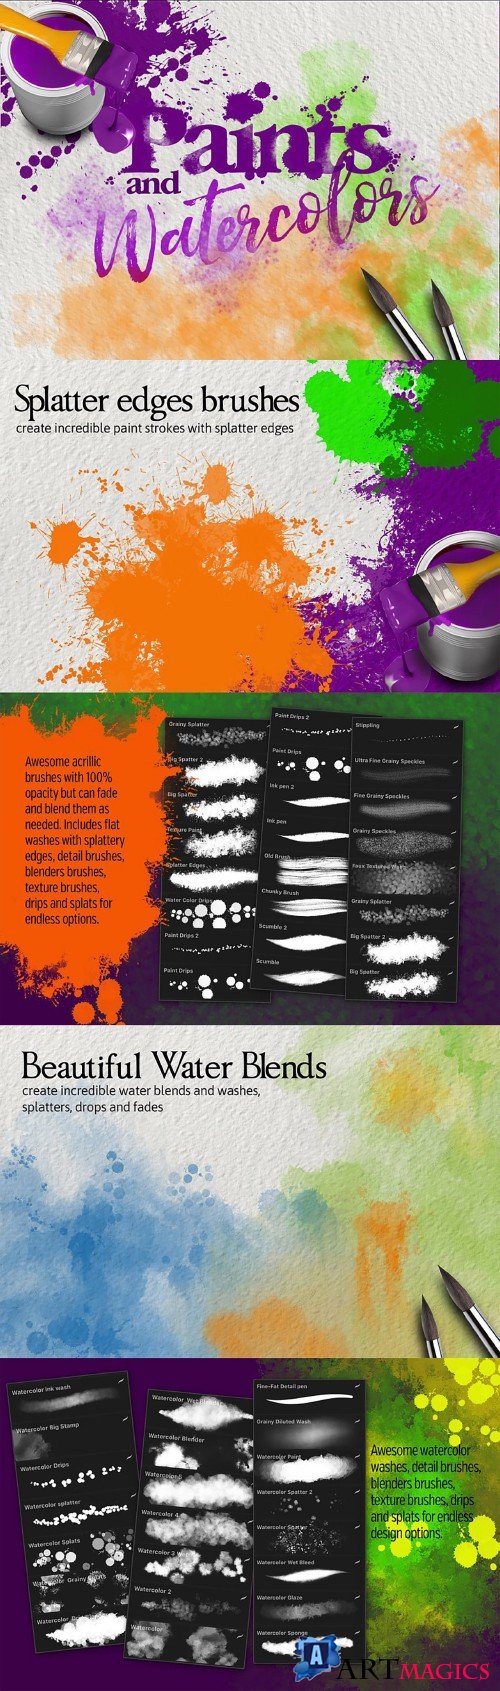 42 Paints and Watercolor Brushes - 3420671